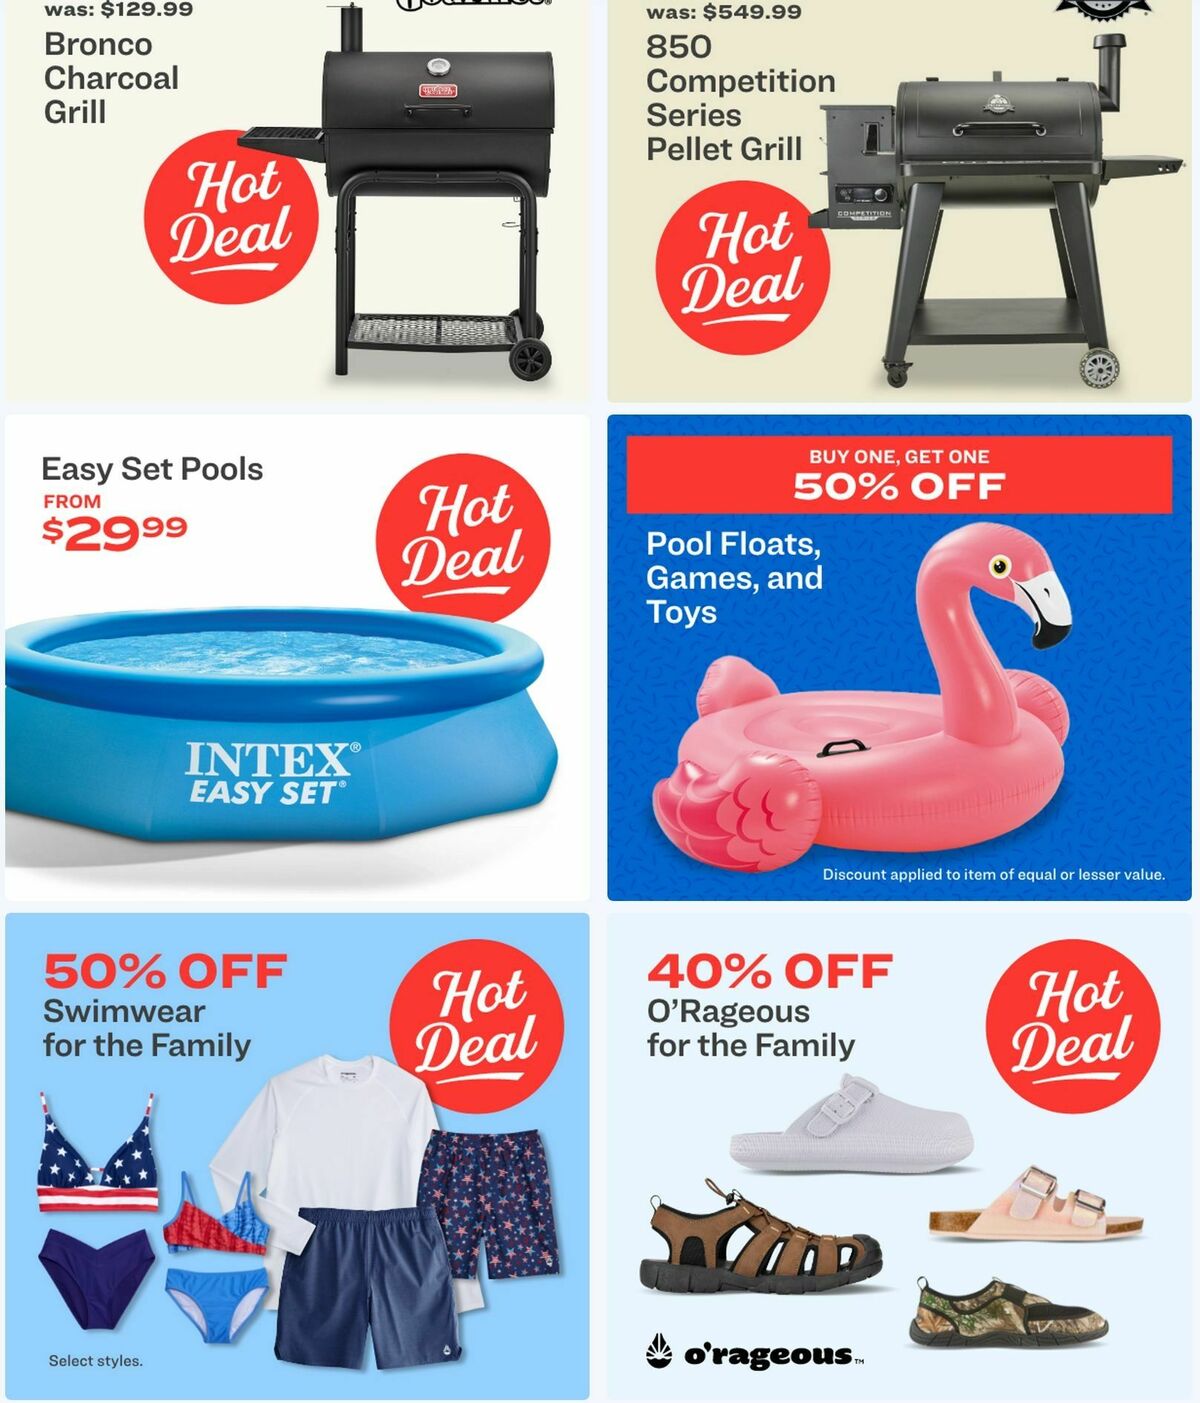 Academy Sports + Outdoors Weekly Ad from June 25